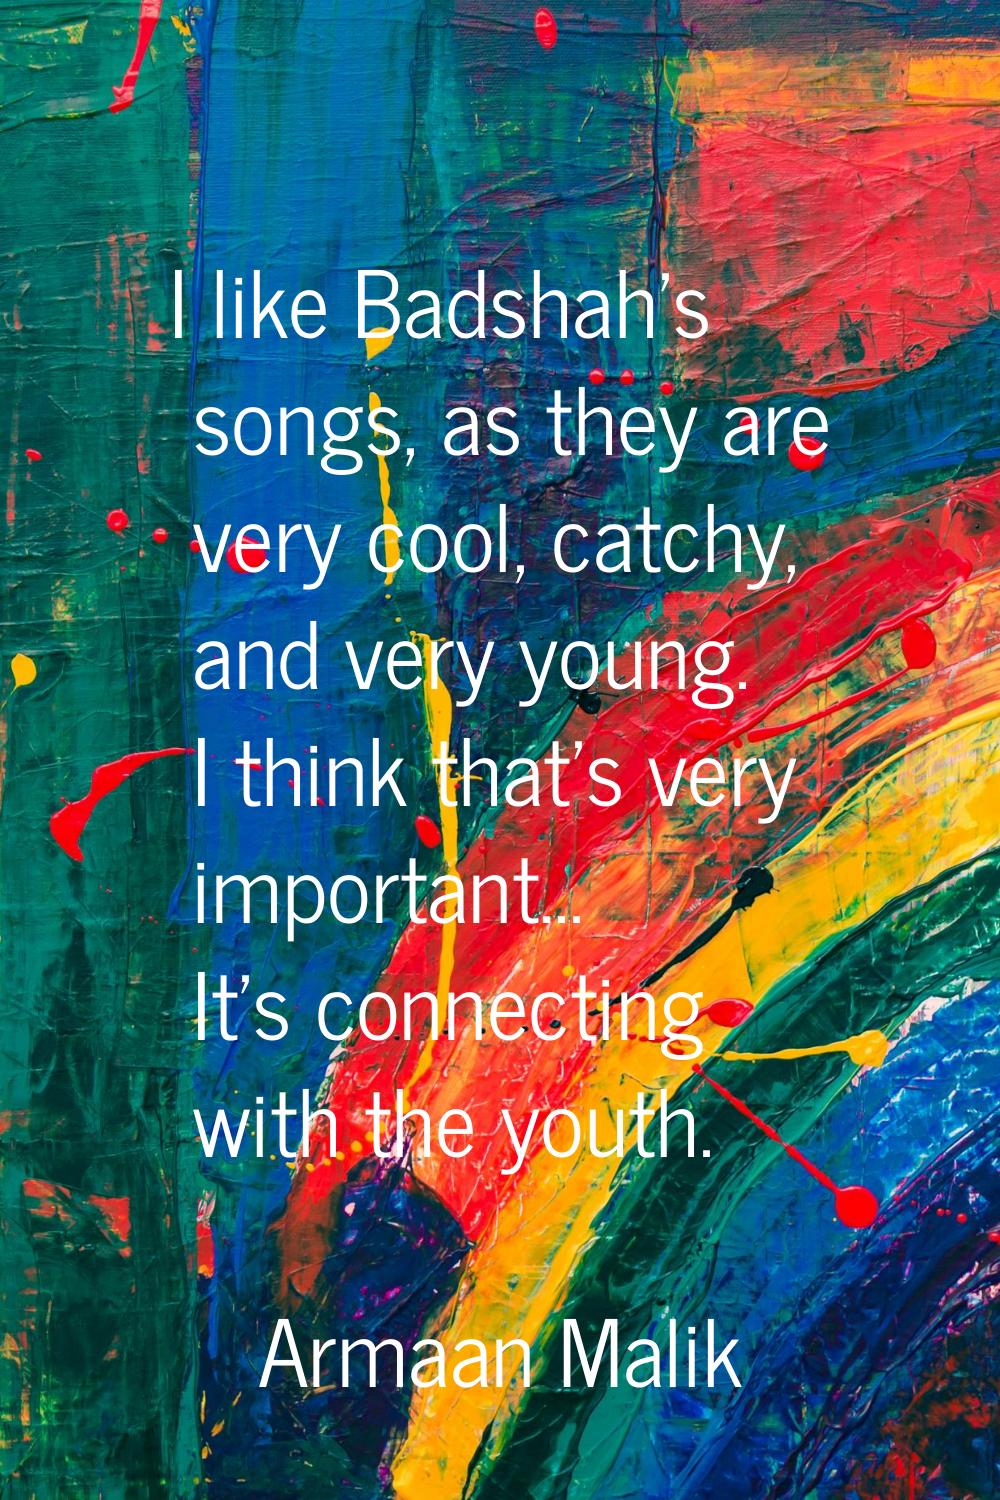 I like Badshah's songs, as they are very cool, catchy, and very young. I think that's very importan